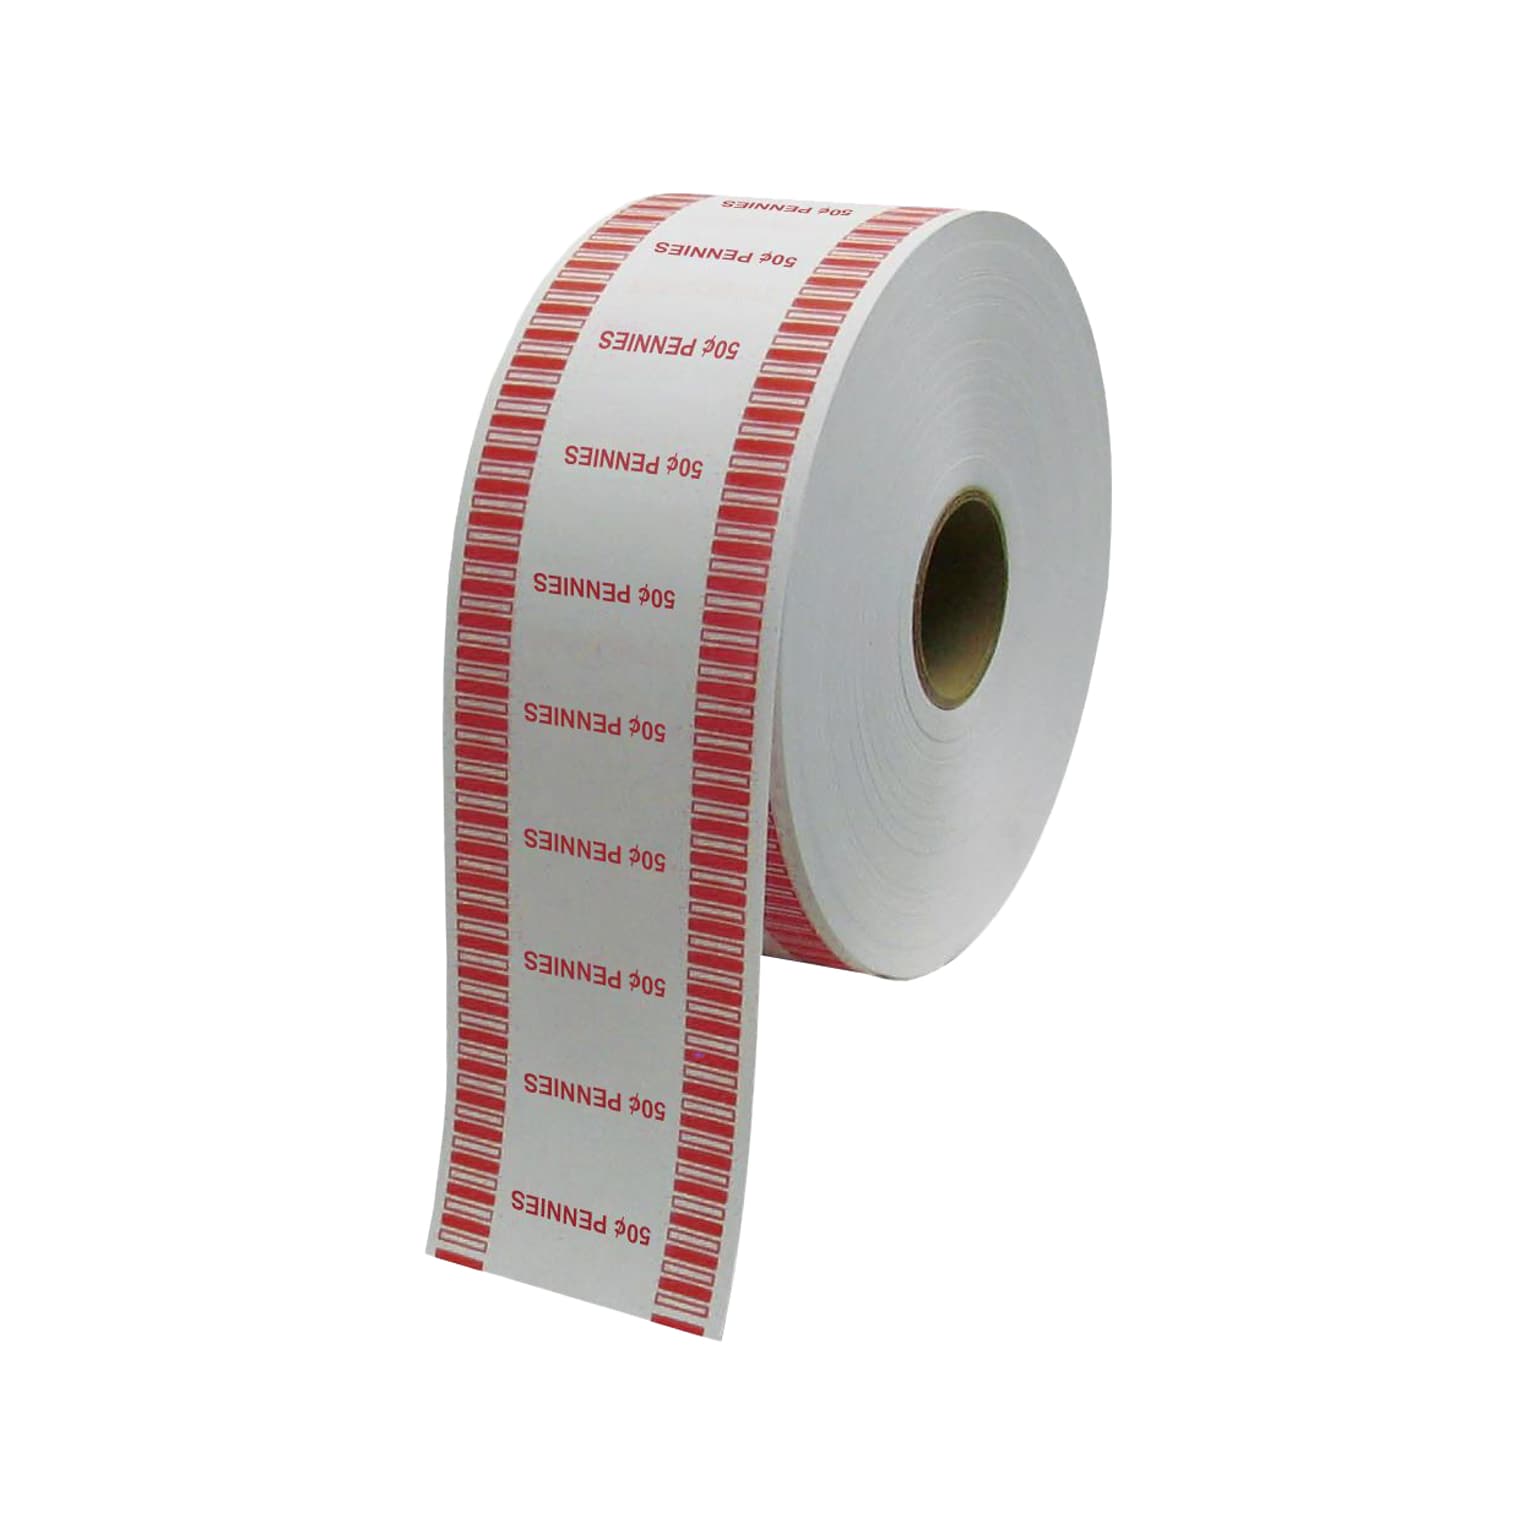 CONTROLTEK 50¢ Penny Automatic Coin Wrapper Roll, White/Red, 8 Rolls/Carton (575034)